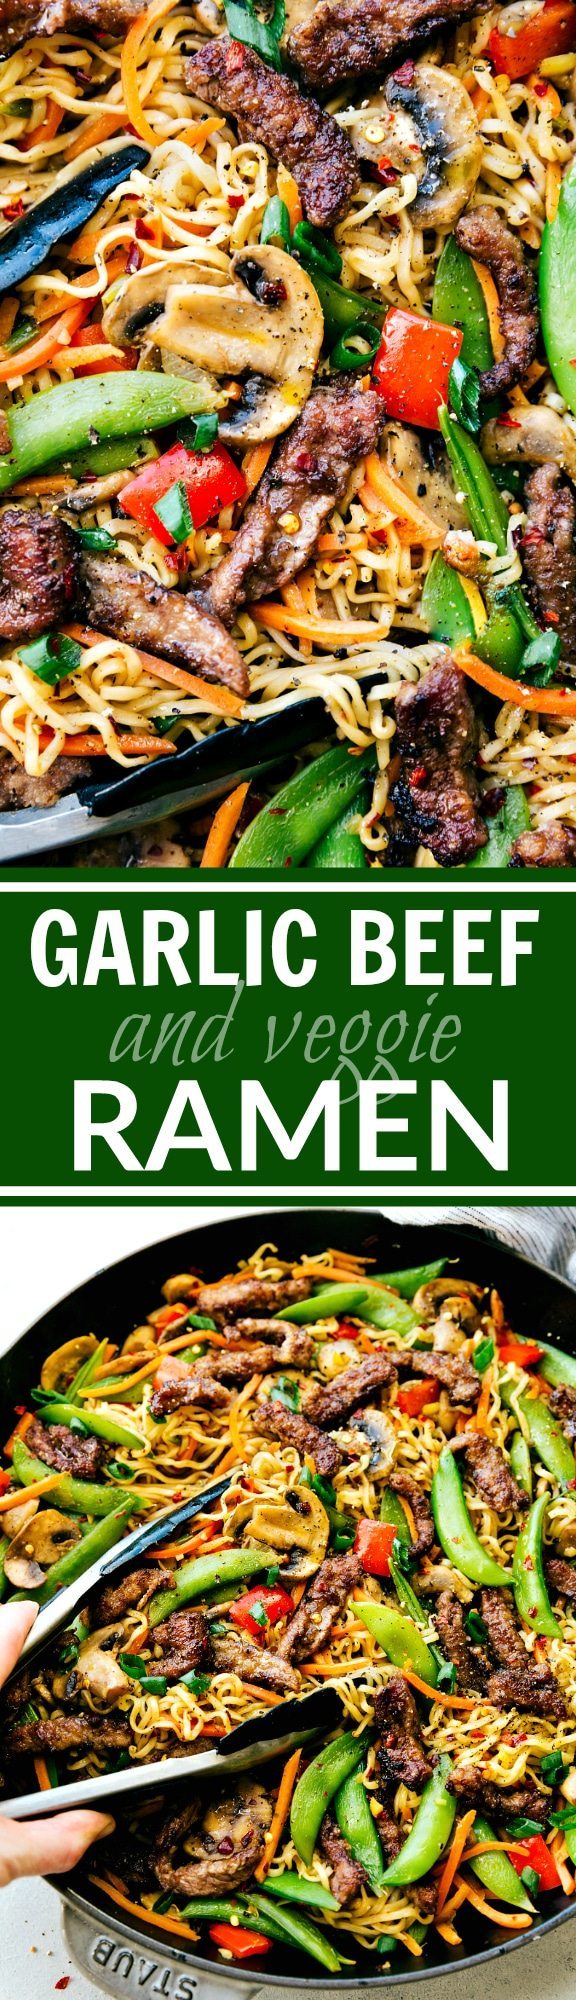 Garlic Beef and Veggie Ramen is an easy 30-minute dinner recipe that is so much better than take-out! via chelseasmessyapron.com